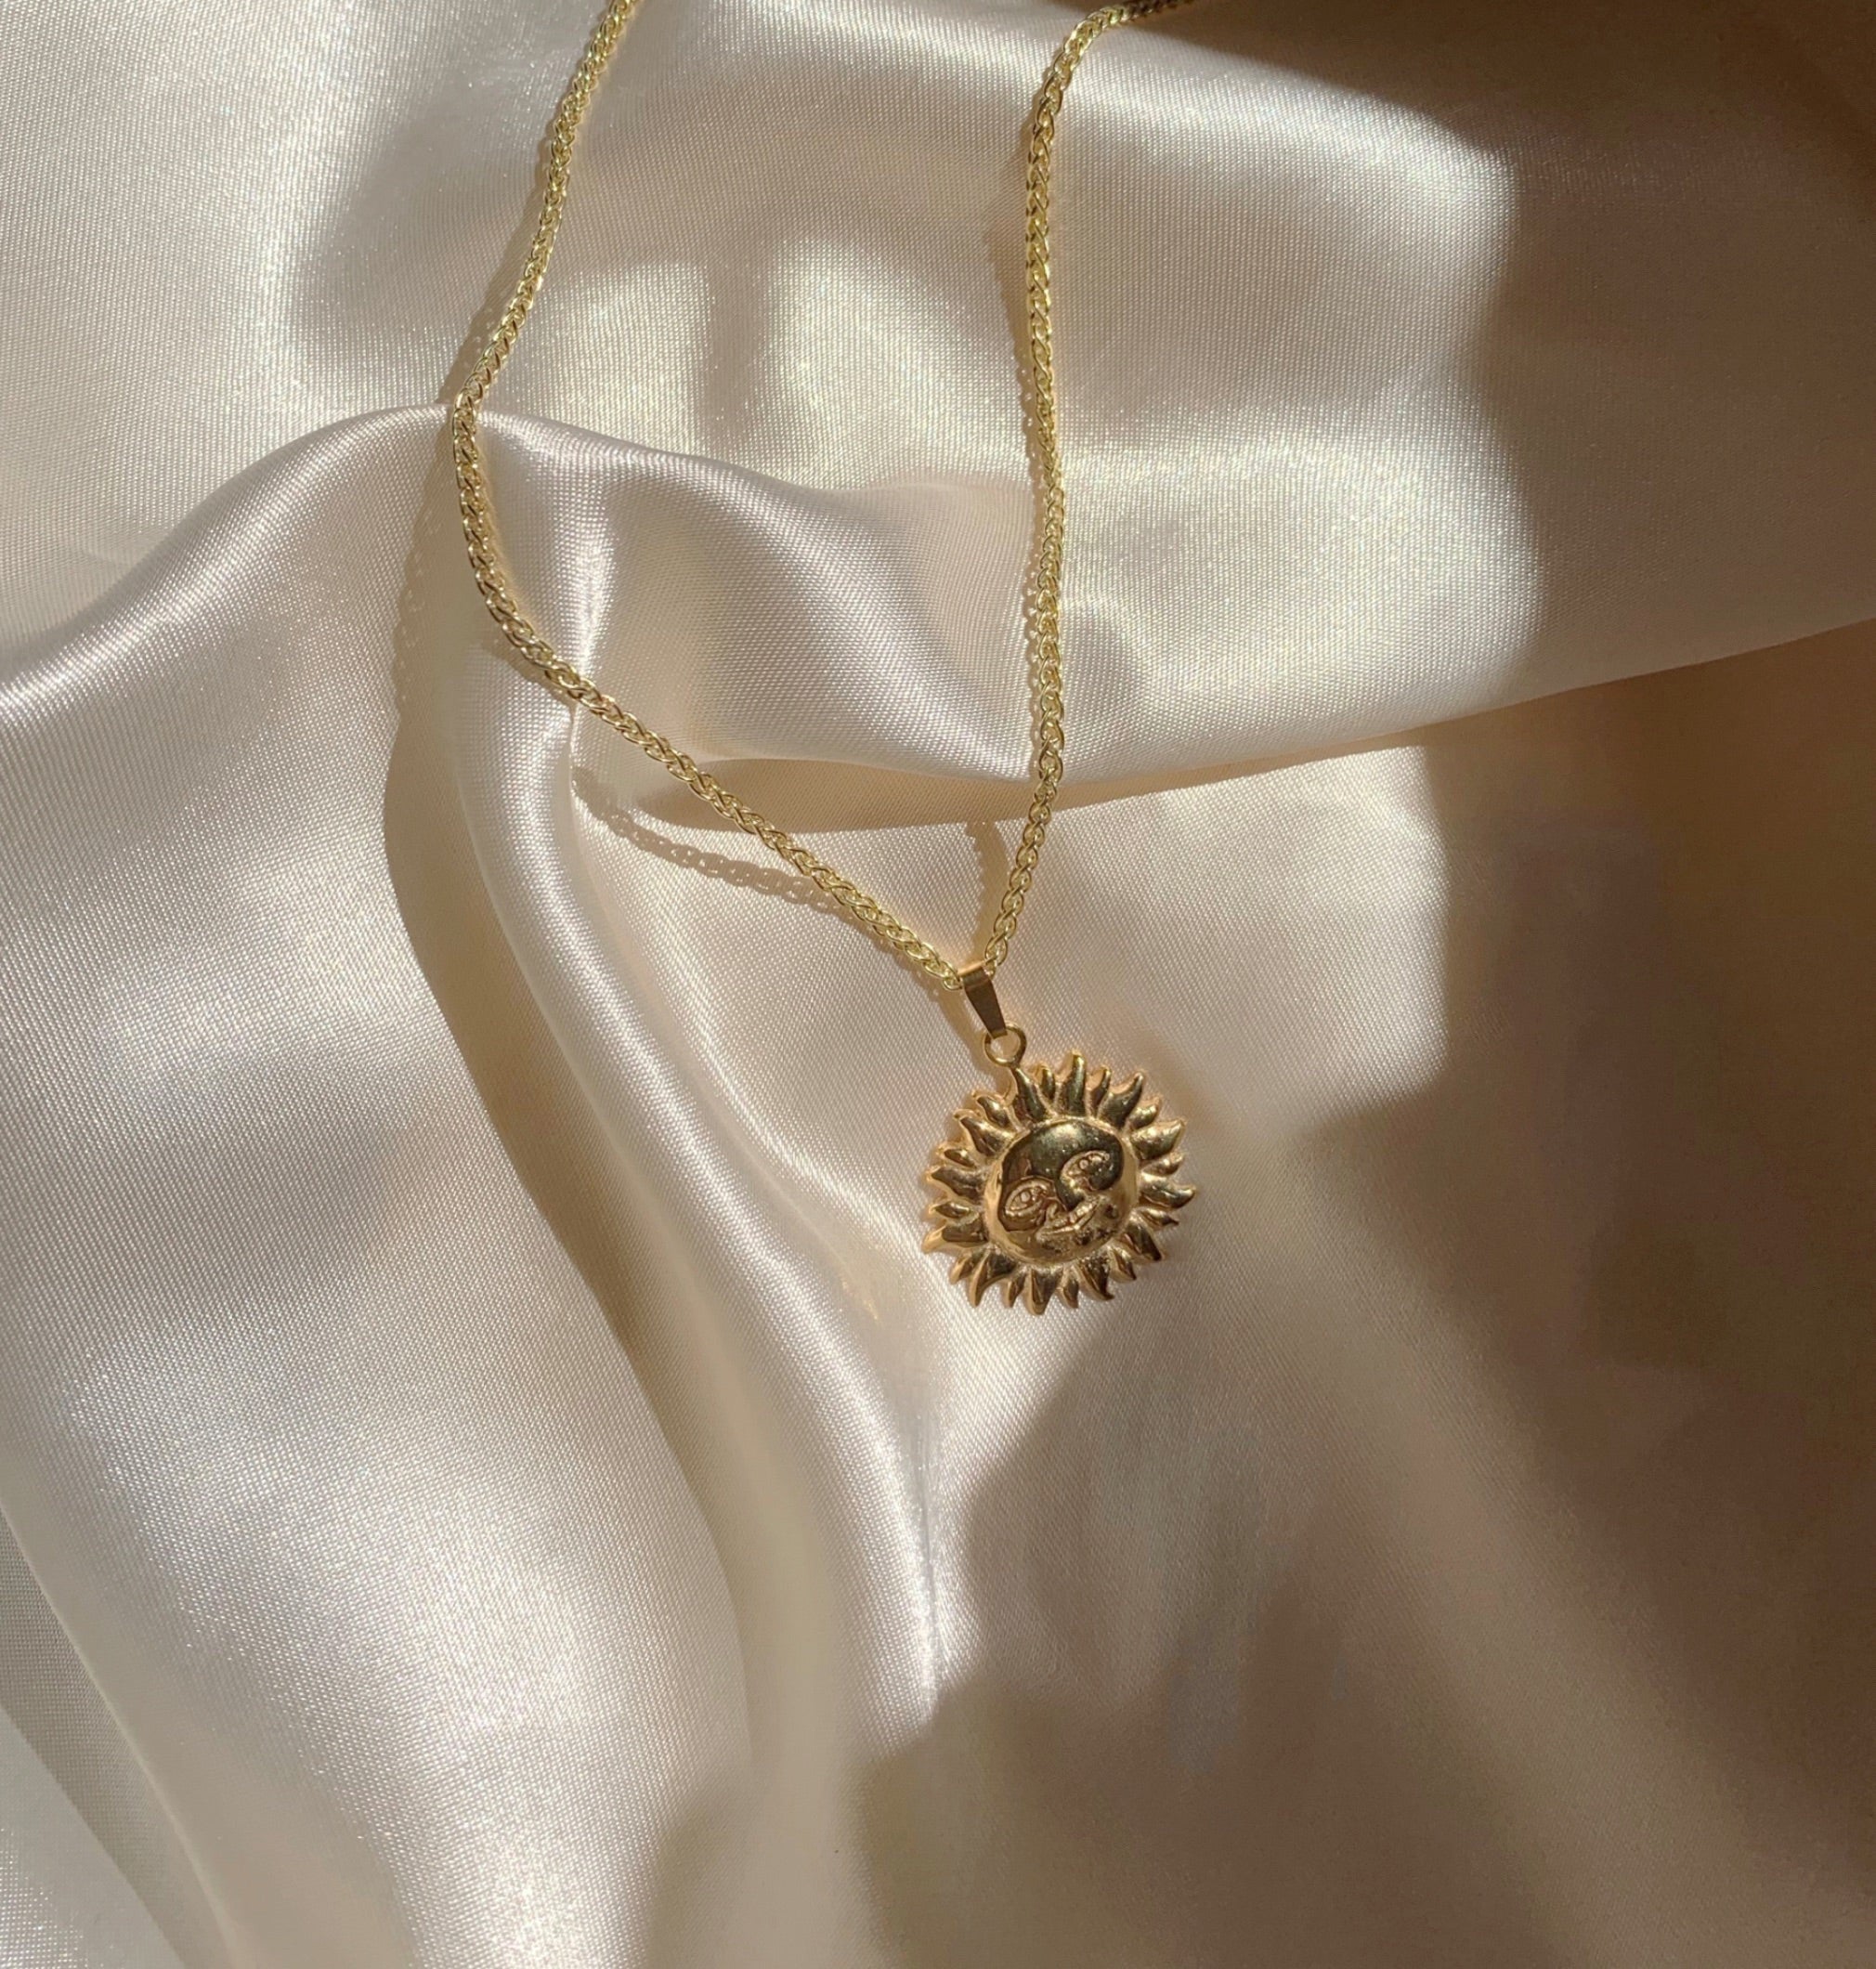 Two Tone 24K & 18K Gold Plated Sterling Silver Sun Necklace